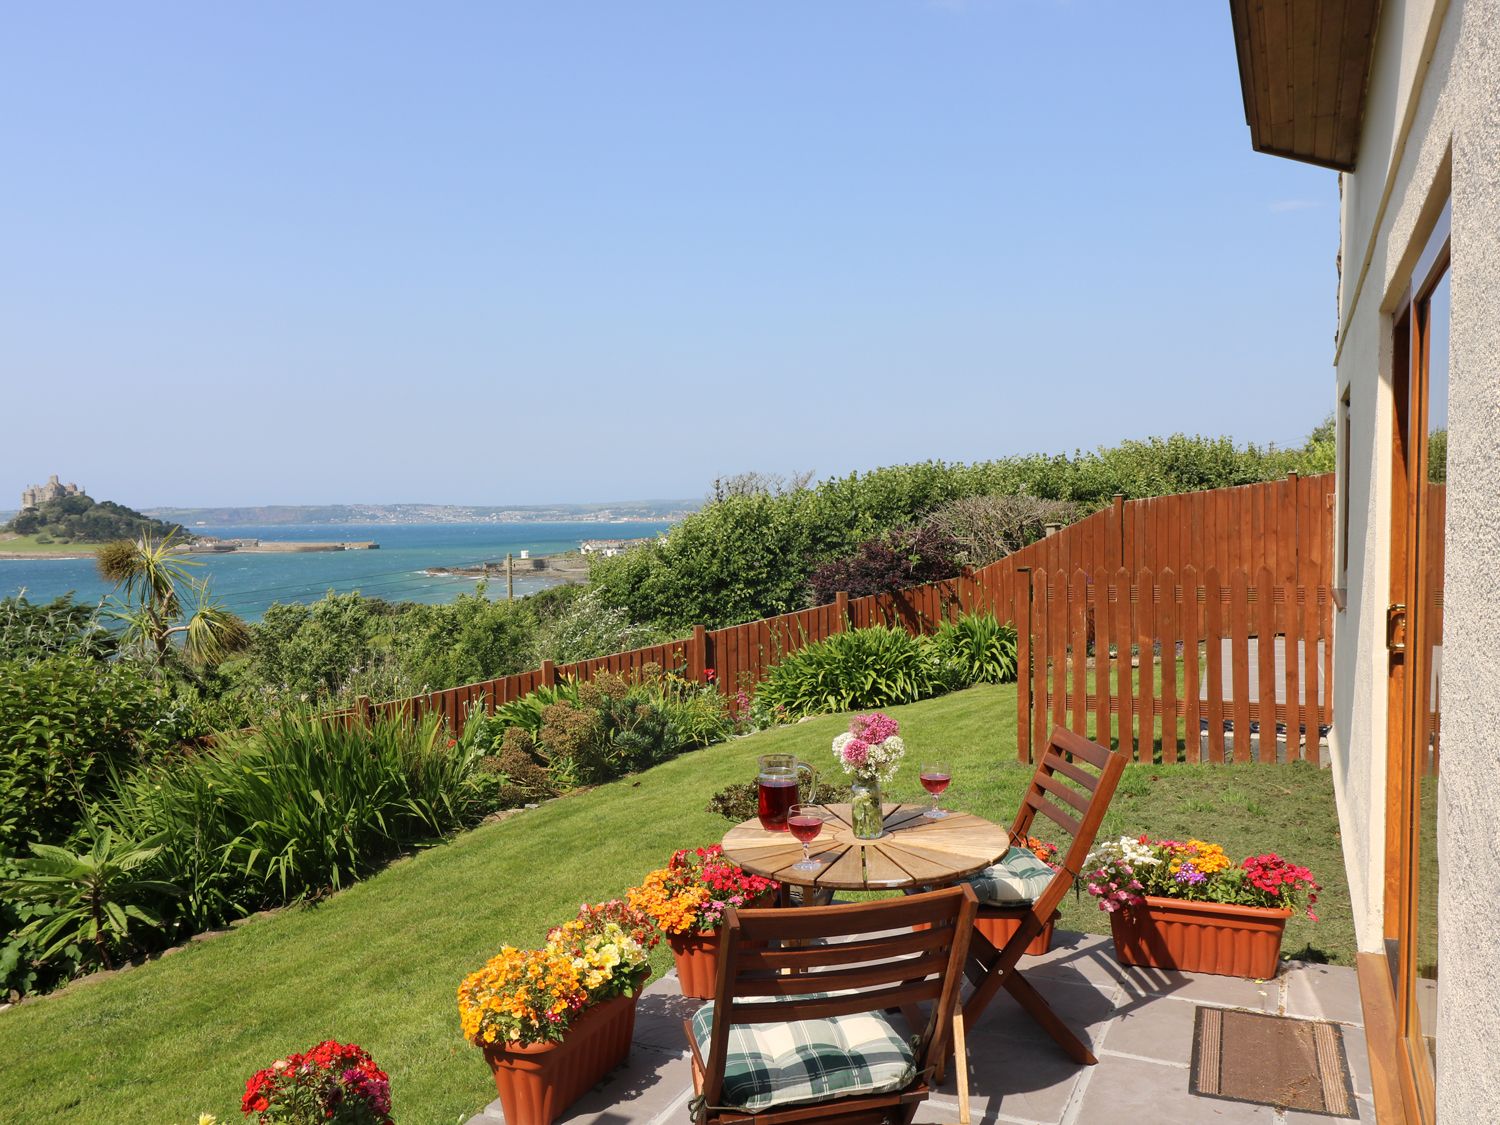 Castle View Apartment - Cornwall - 959259 - photo 1